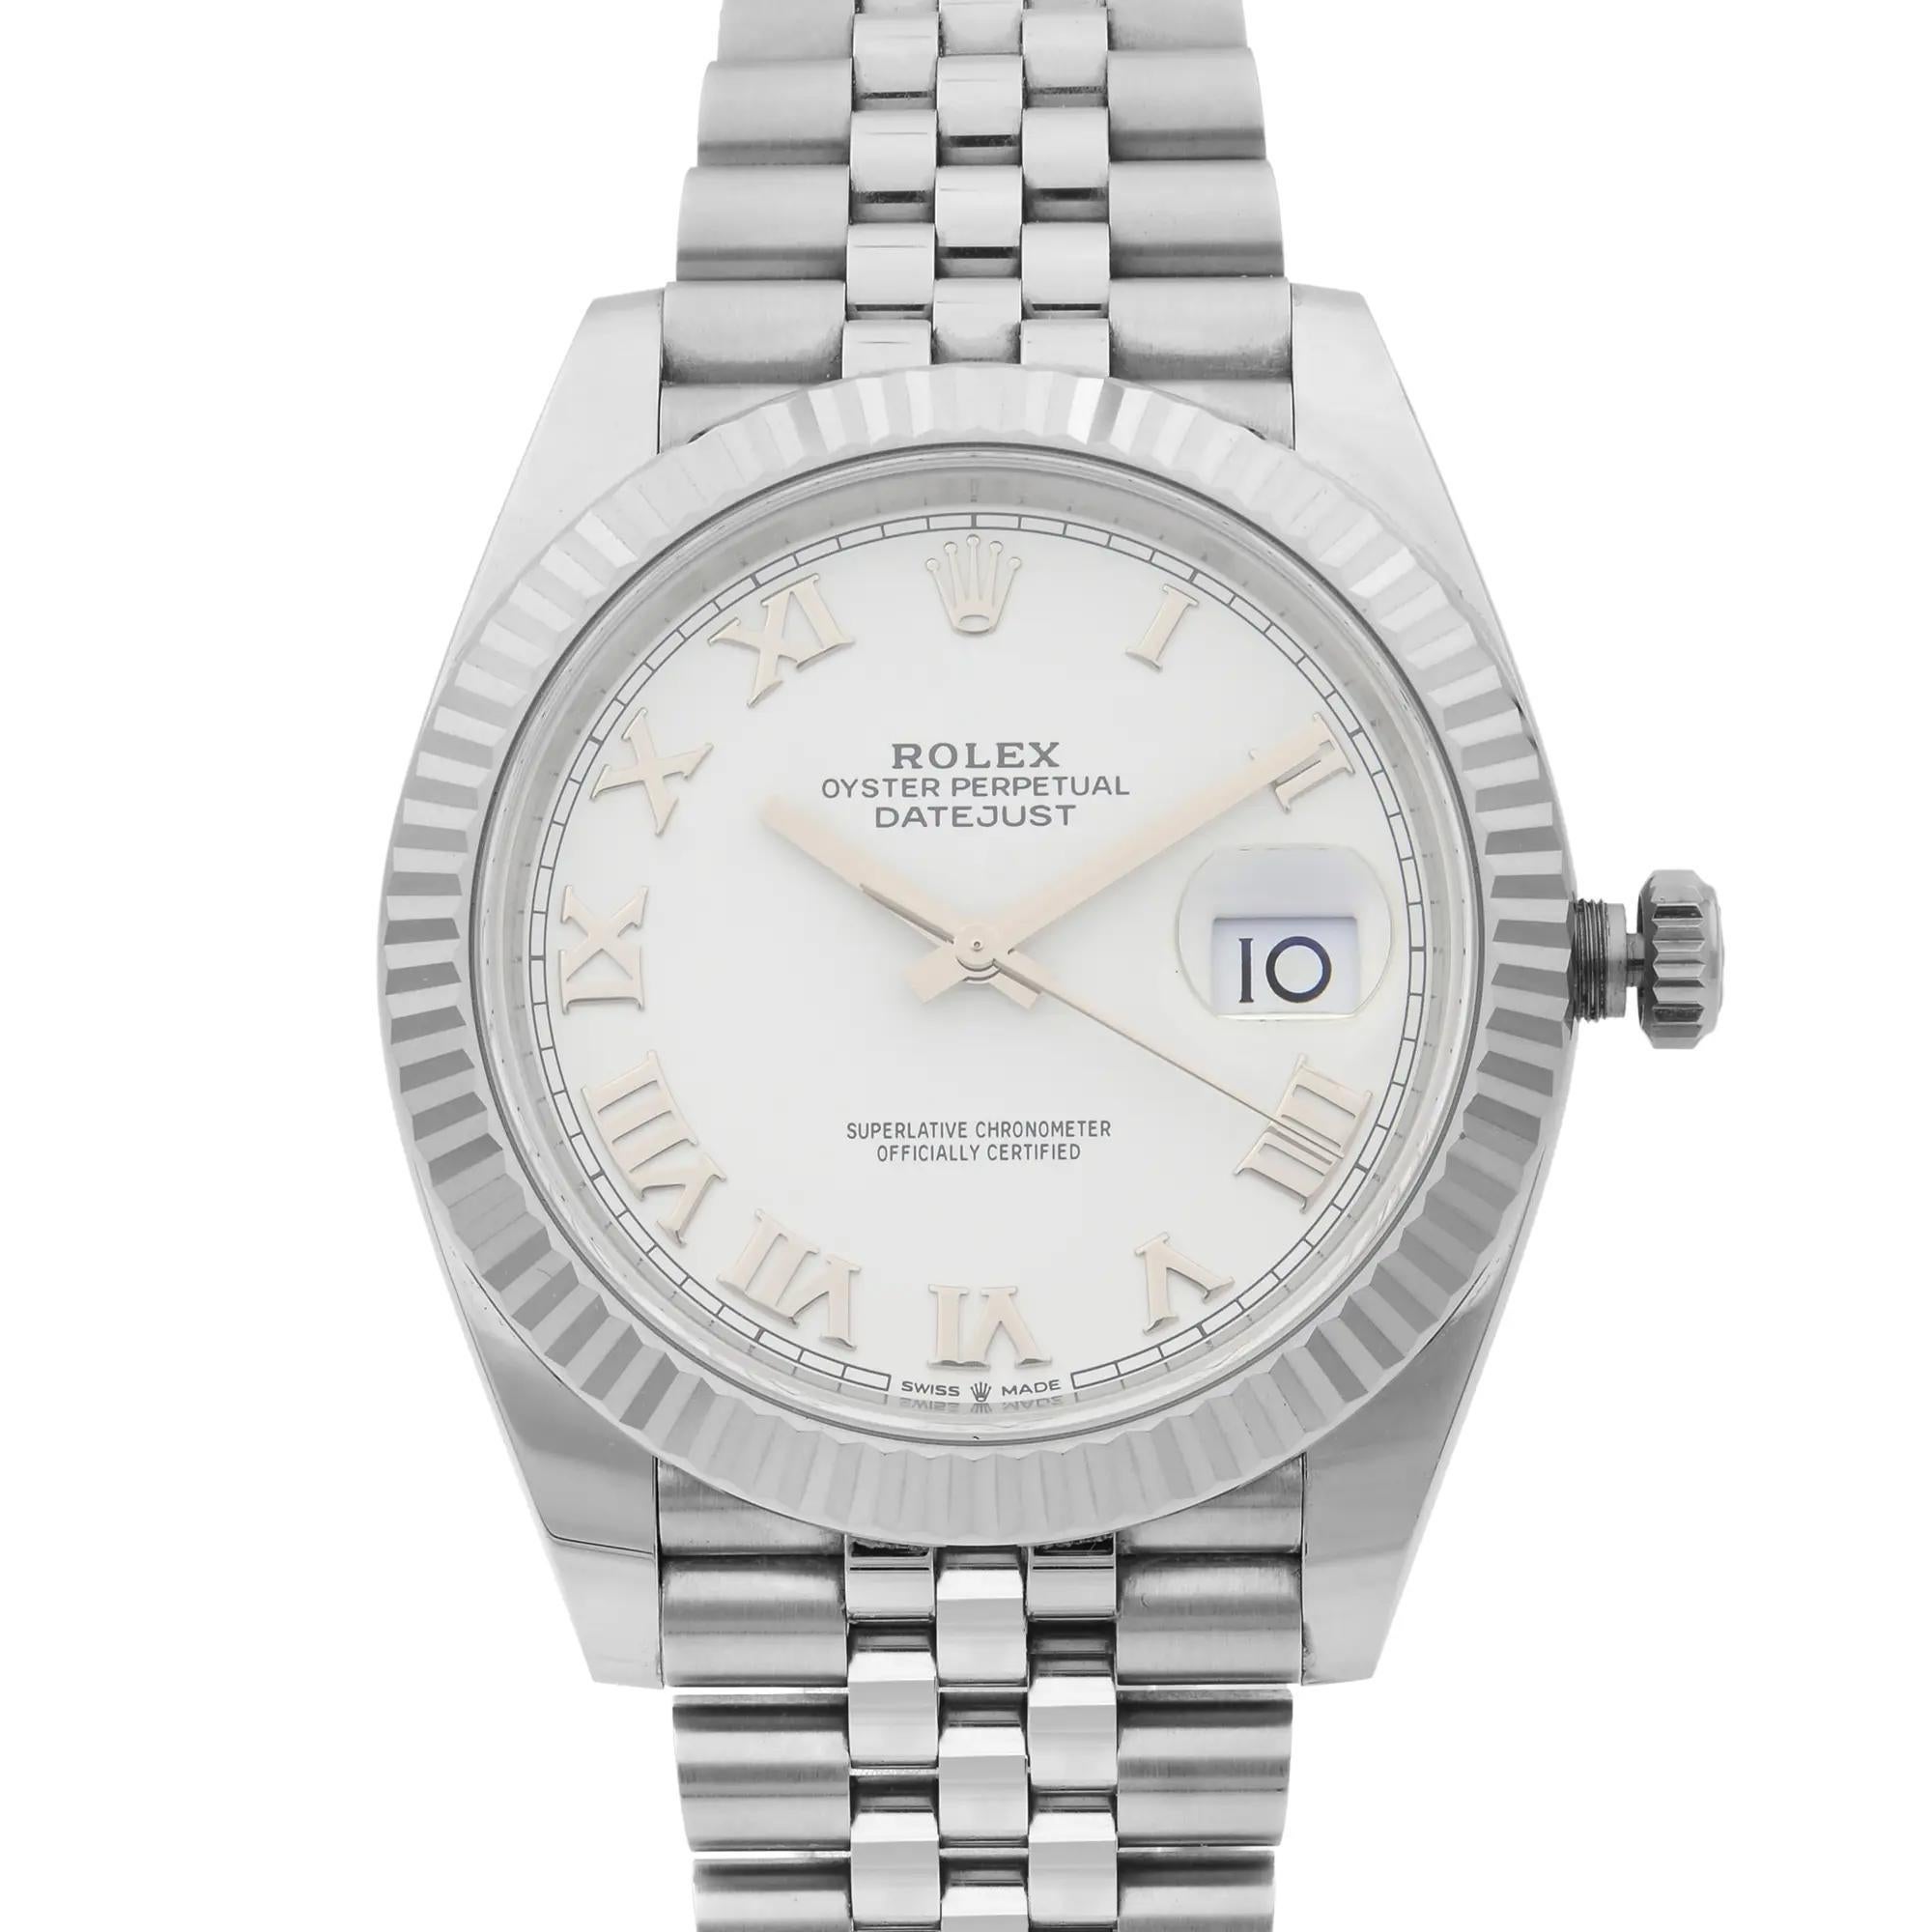 New watch. 2024 card. Comes with the original box and papers.

Rolex Datejust Wristwatch - Model 126334
General Information

Brand: Rolex
Model: Rolex Datejust 126334
Model Number: 126334
Country/Region of Manufacture: Switzerland
Department: